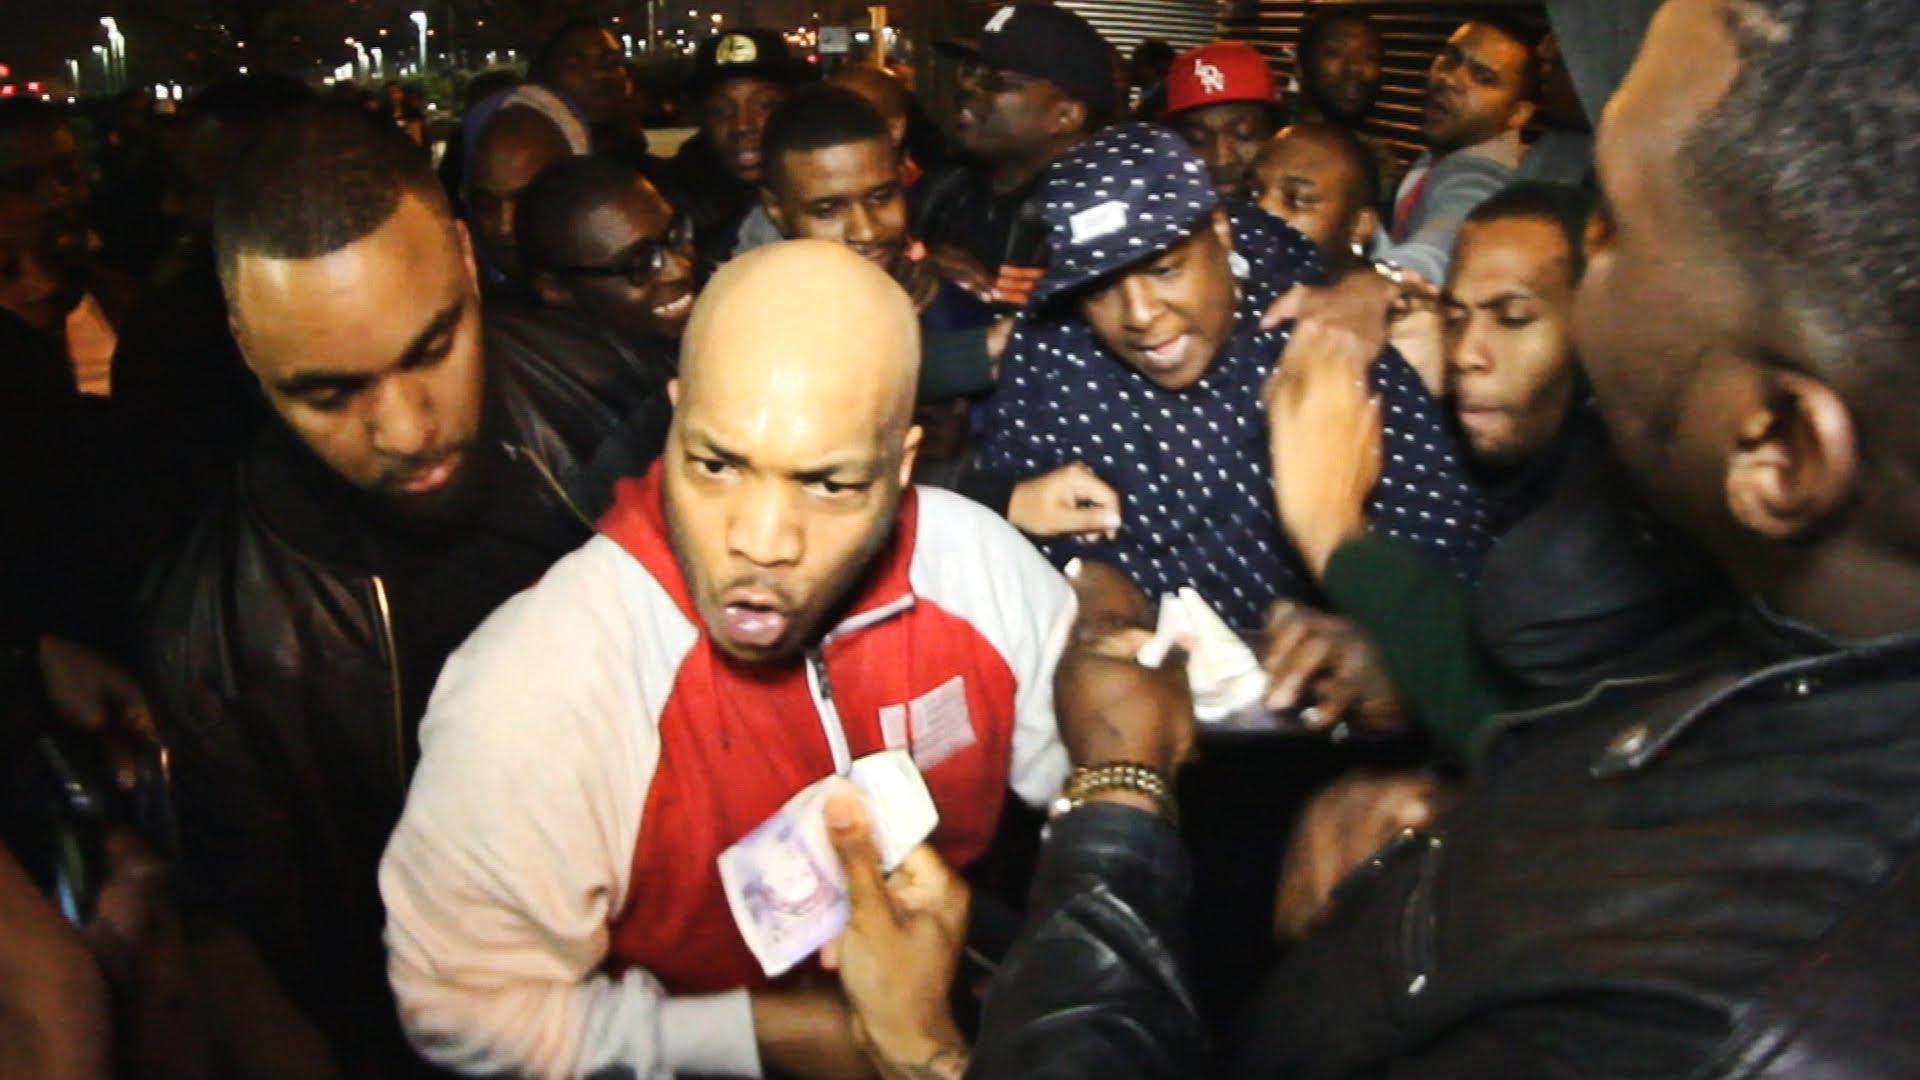 Styles P & Jadakiss Nearly Fight Male Fans At Show